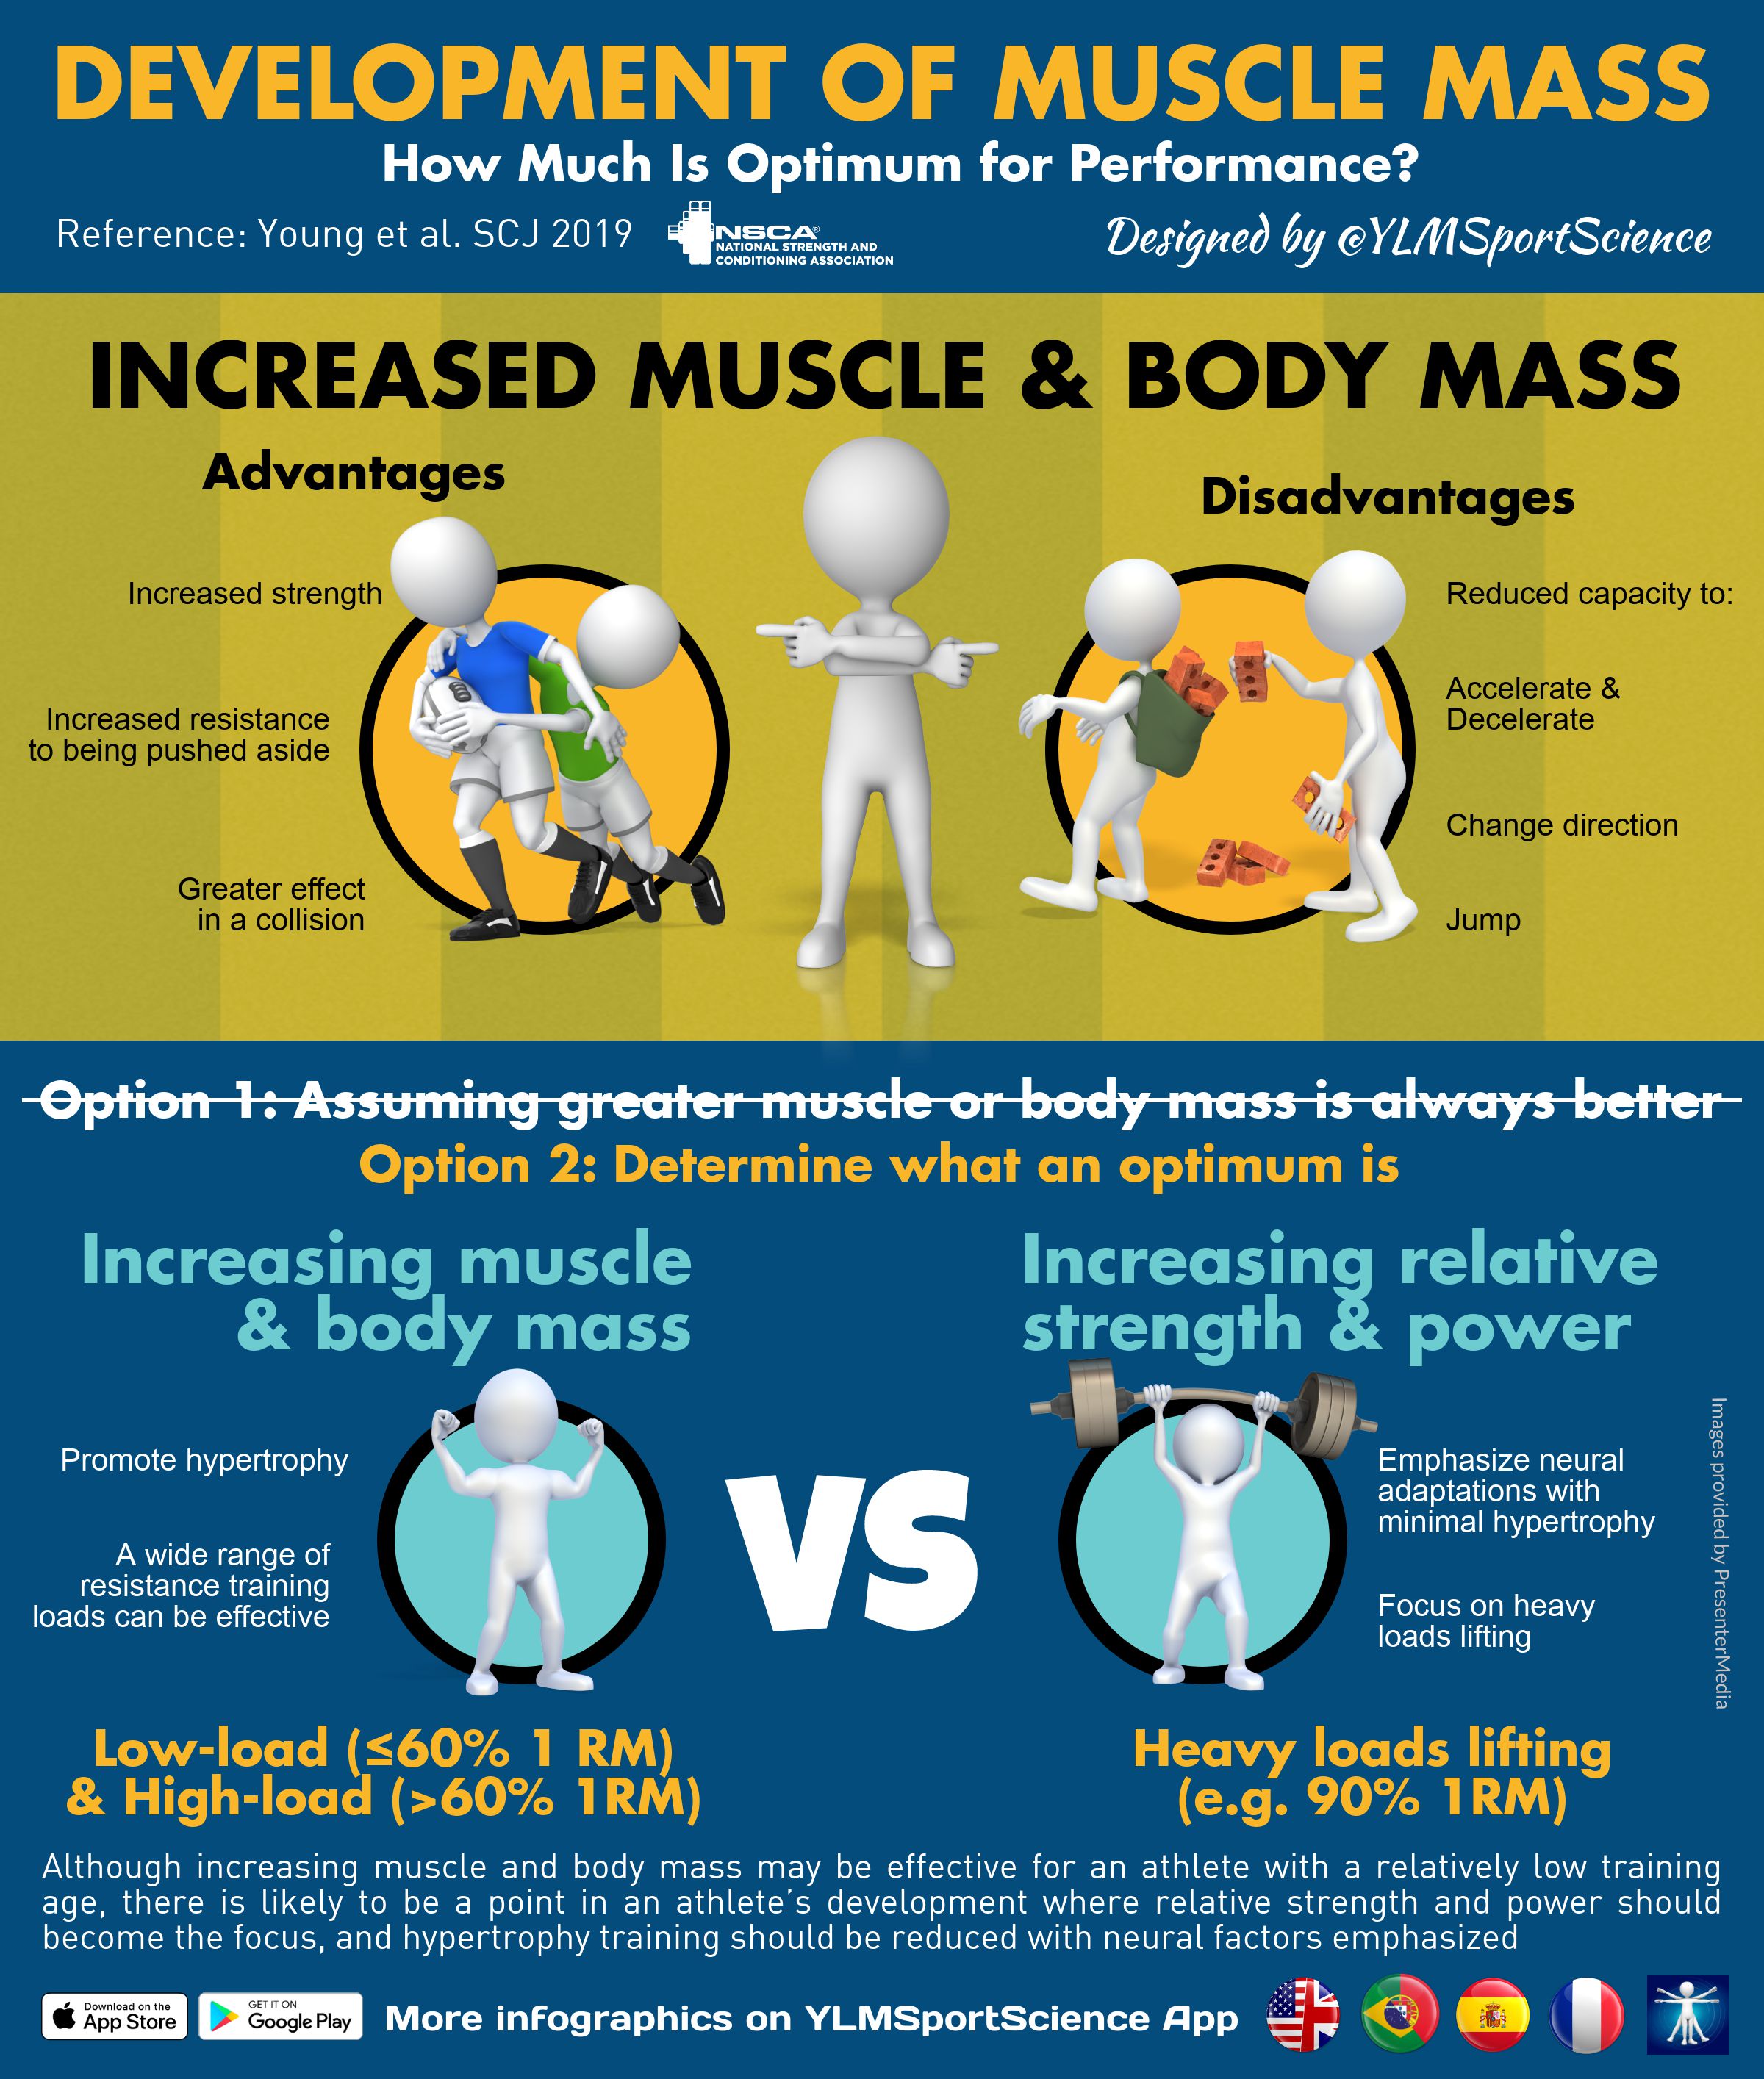 This infographic highlights differences between hypertrophic gains and neural adaptations for optimal athletic performance.